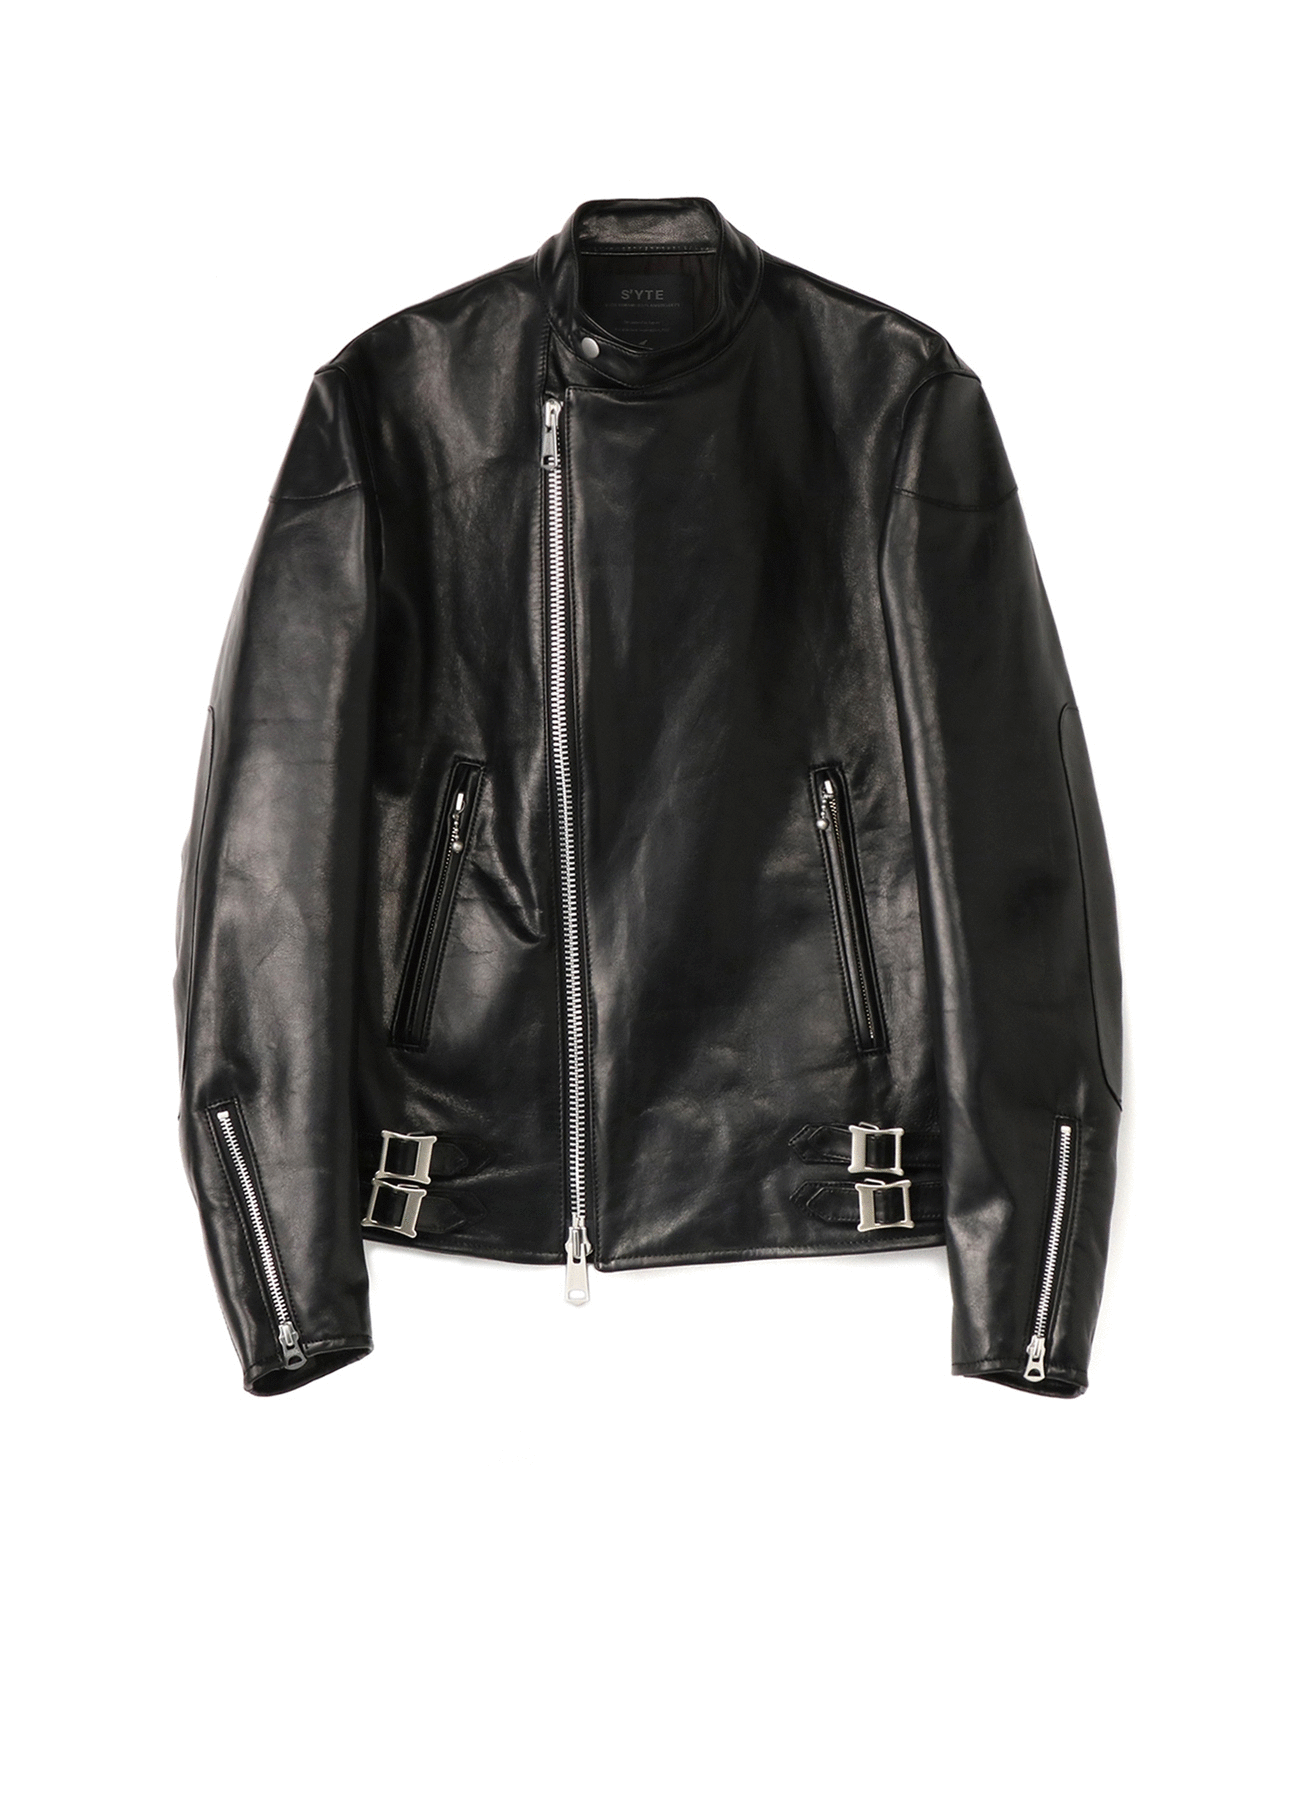 Lambskin Leather Stand Collar Double Riders Jacket